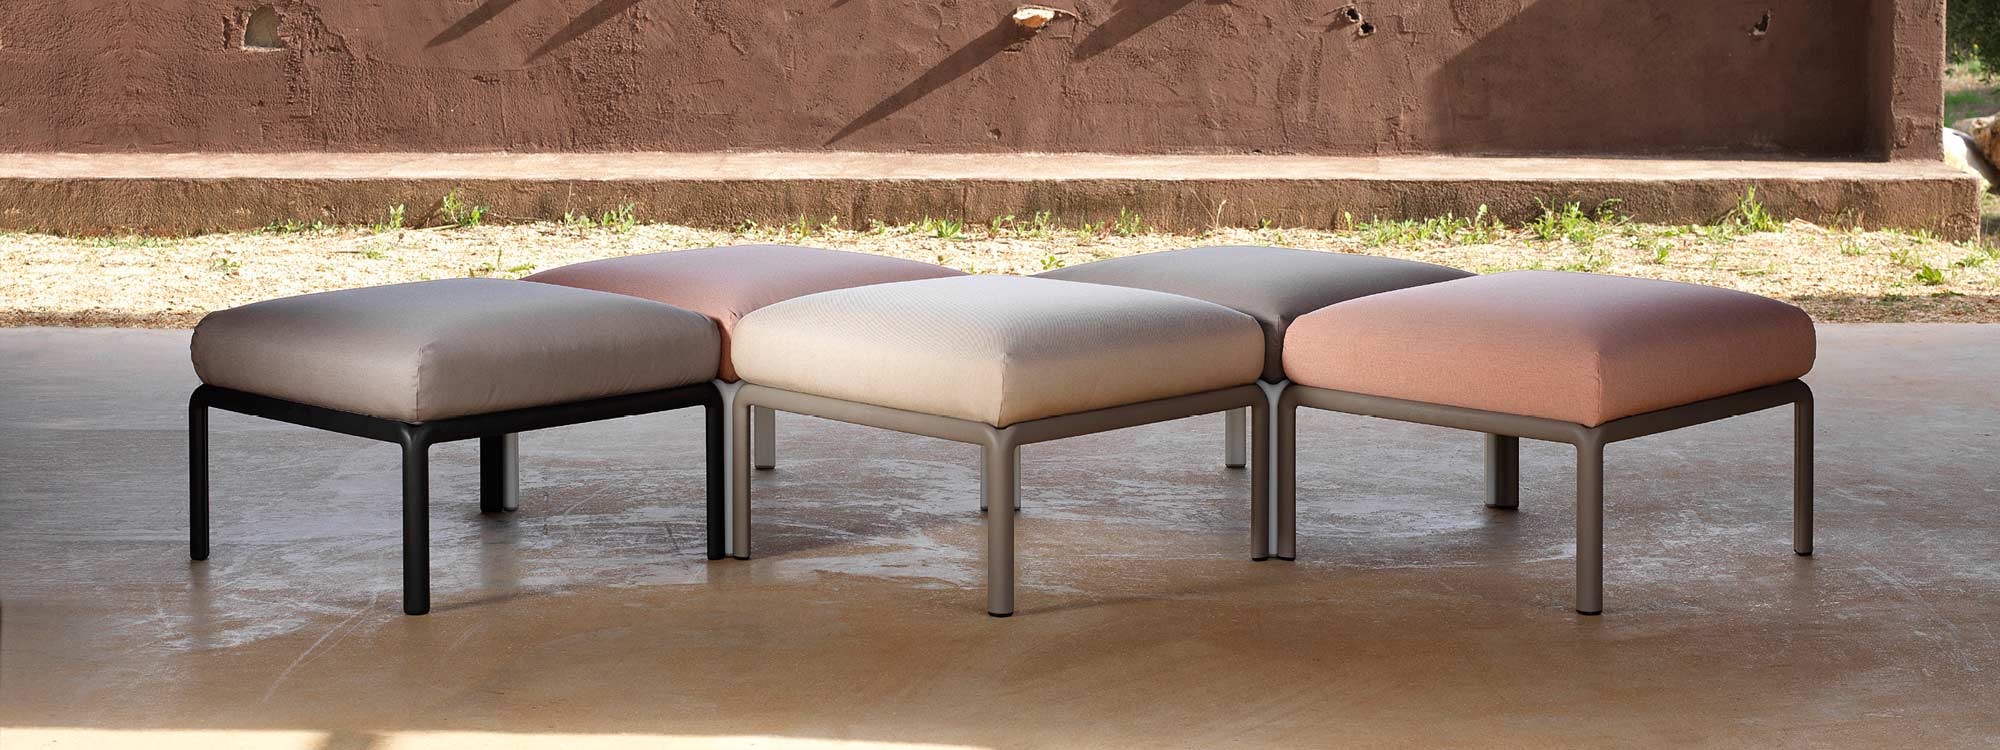 Image of 4 Komodo outdoor ottomans in different colours placed together